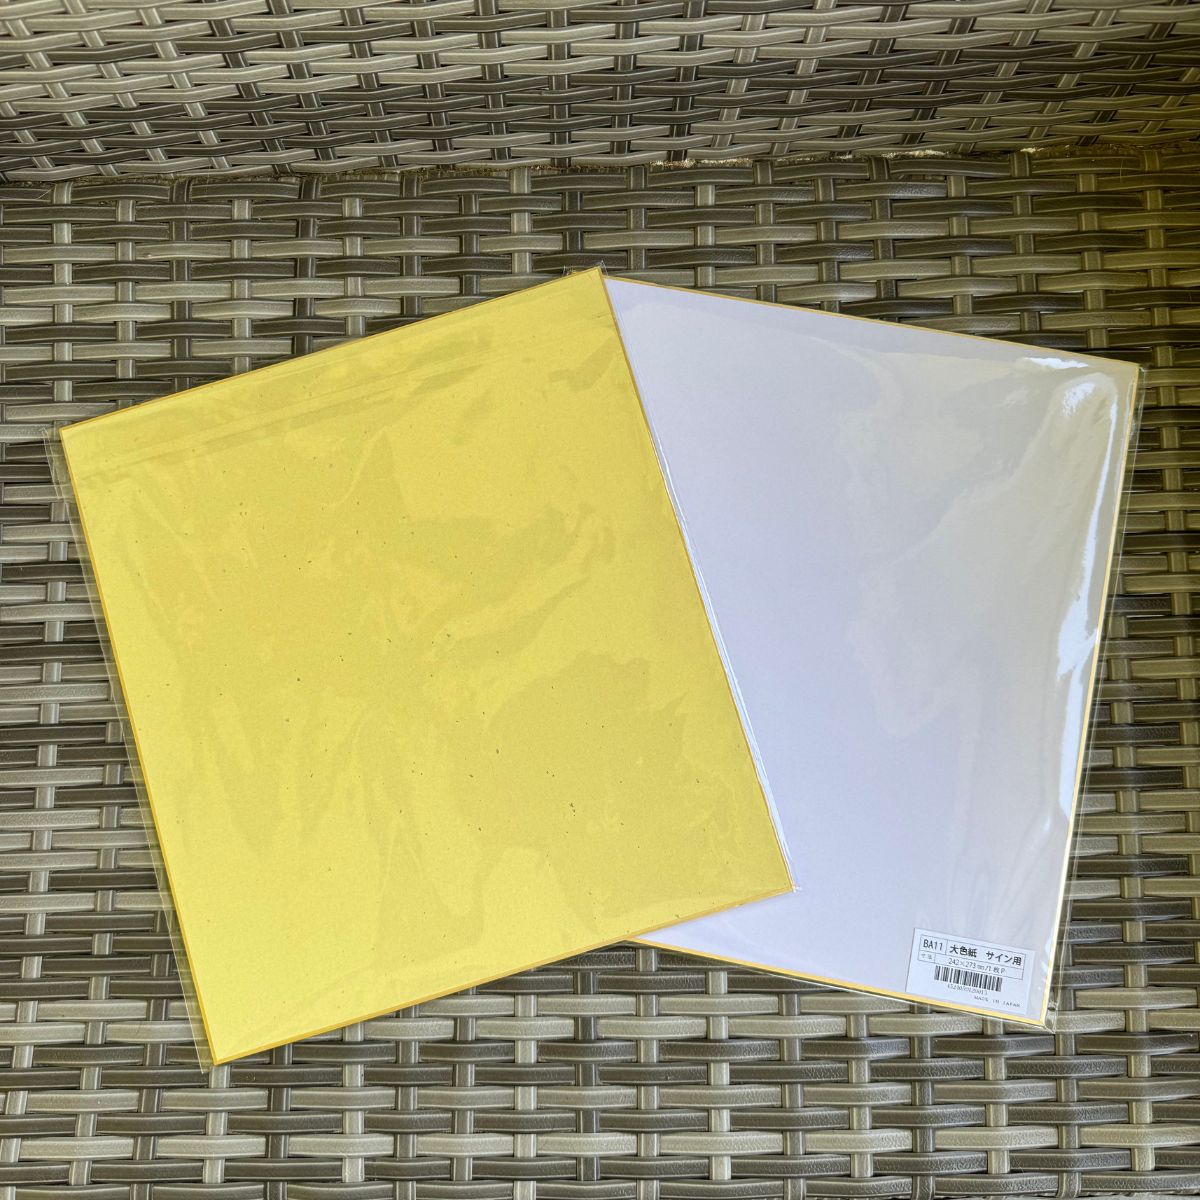 50 Shikishi Board Set 9.5 x 10.75" Gold Bordered for Japanese Art or Calligraphy (Pack of 50)